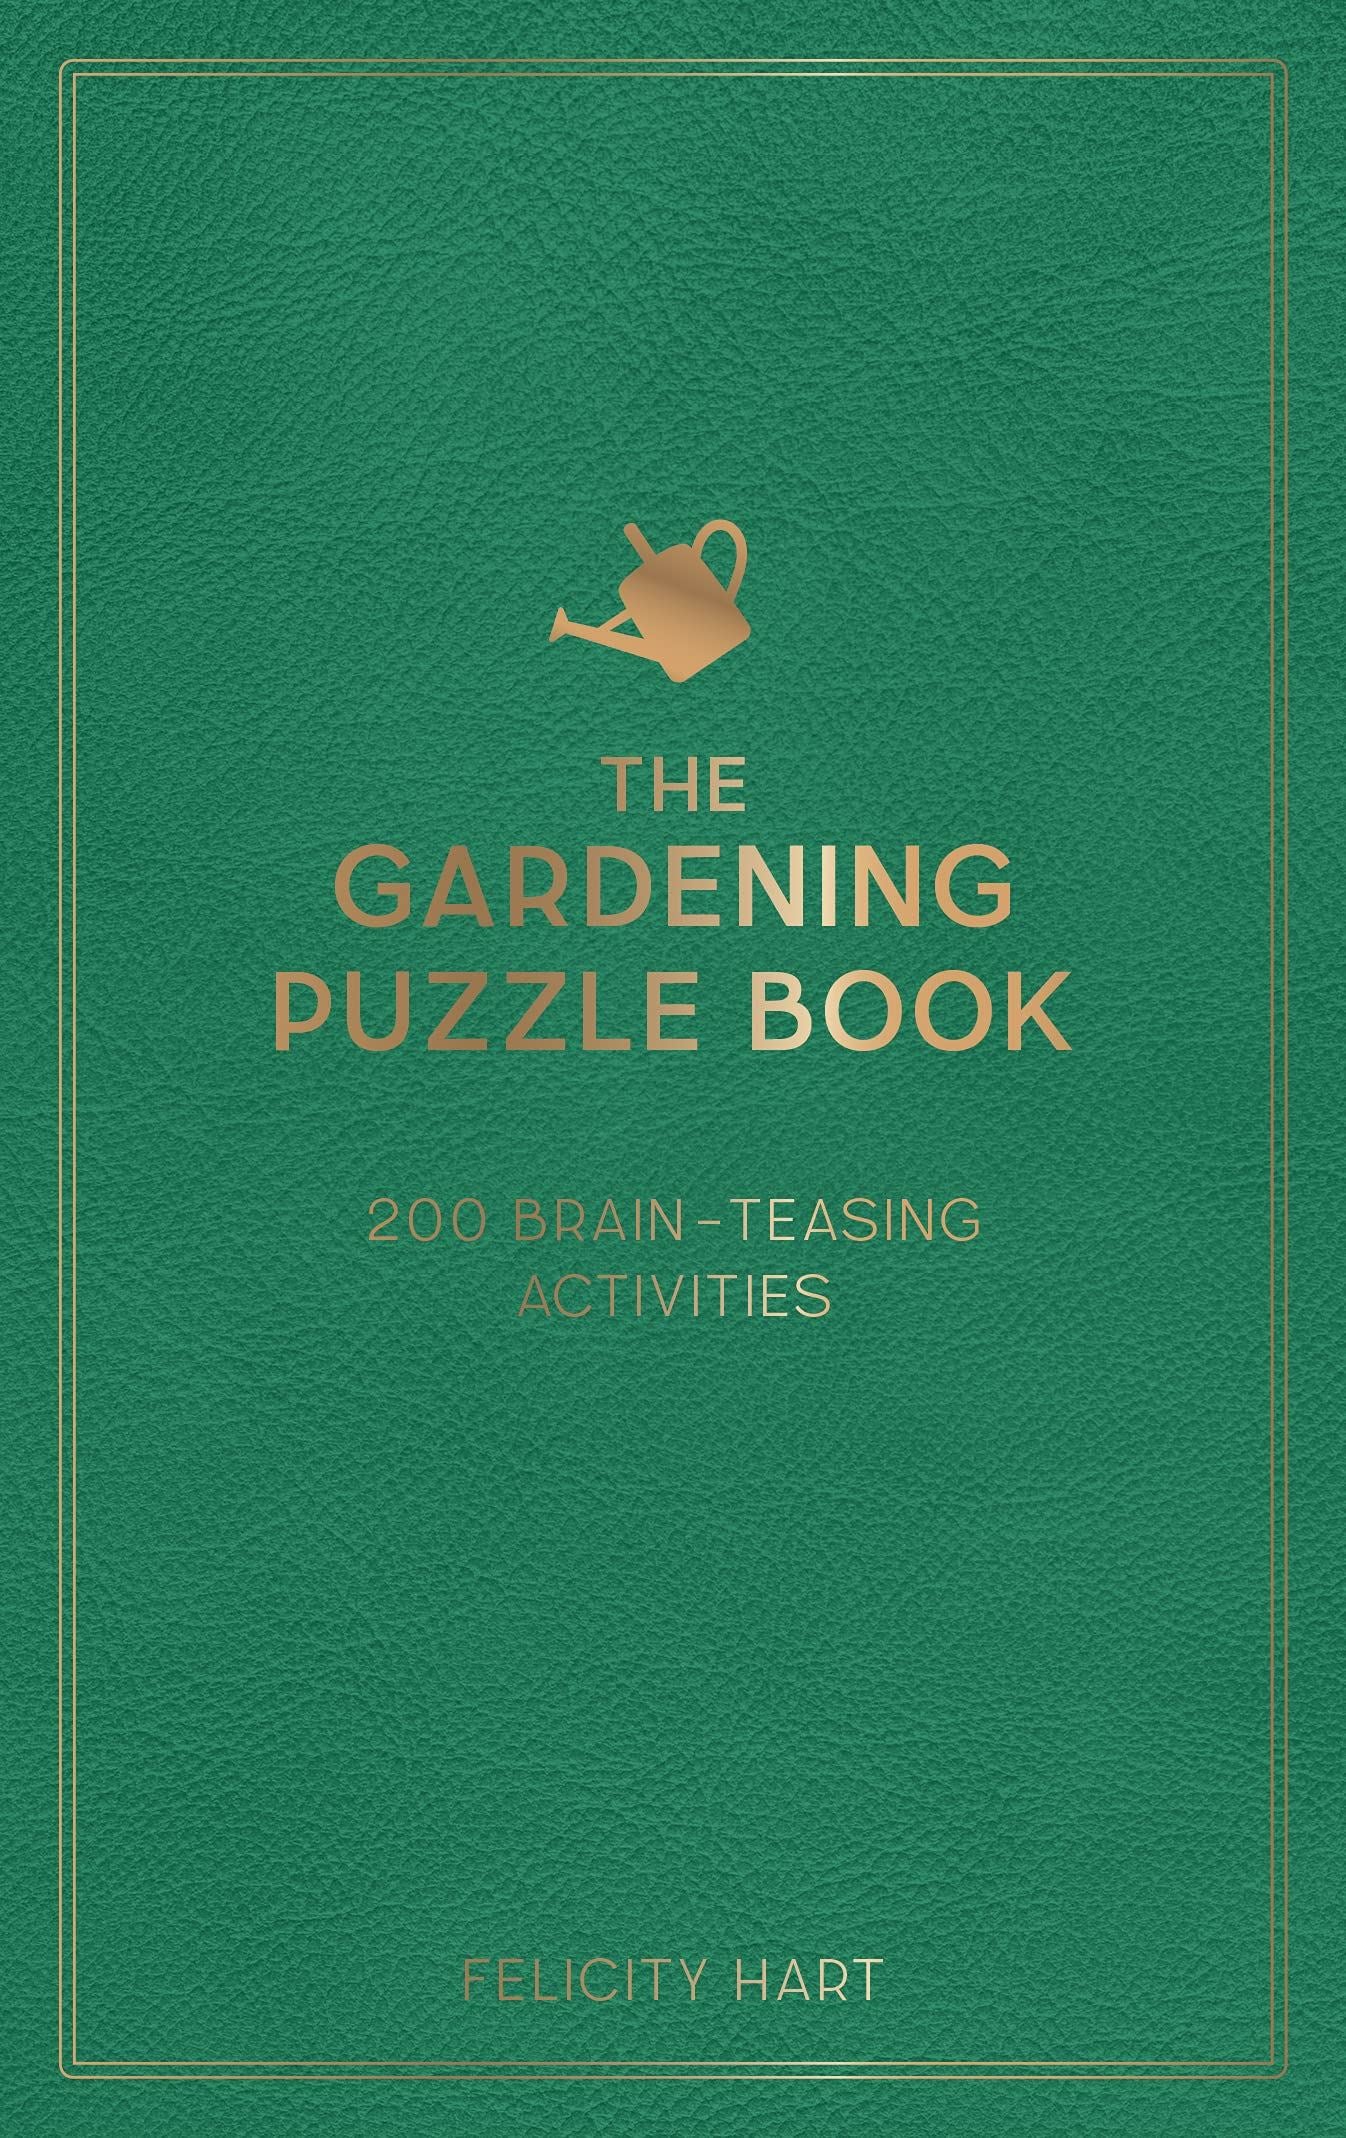 The Gardening Puzzle Book - Felicity Hart